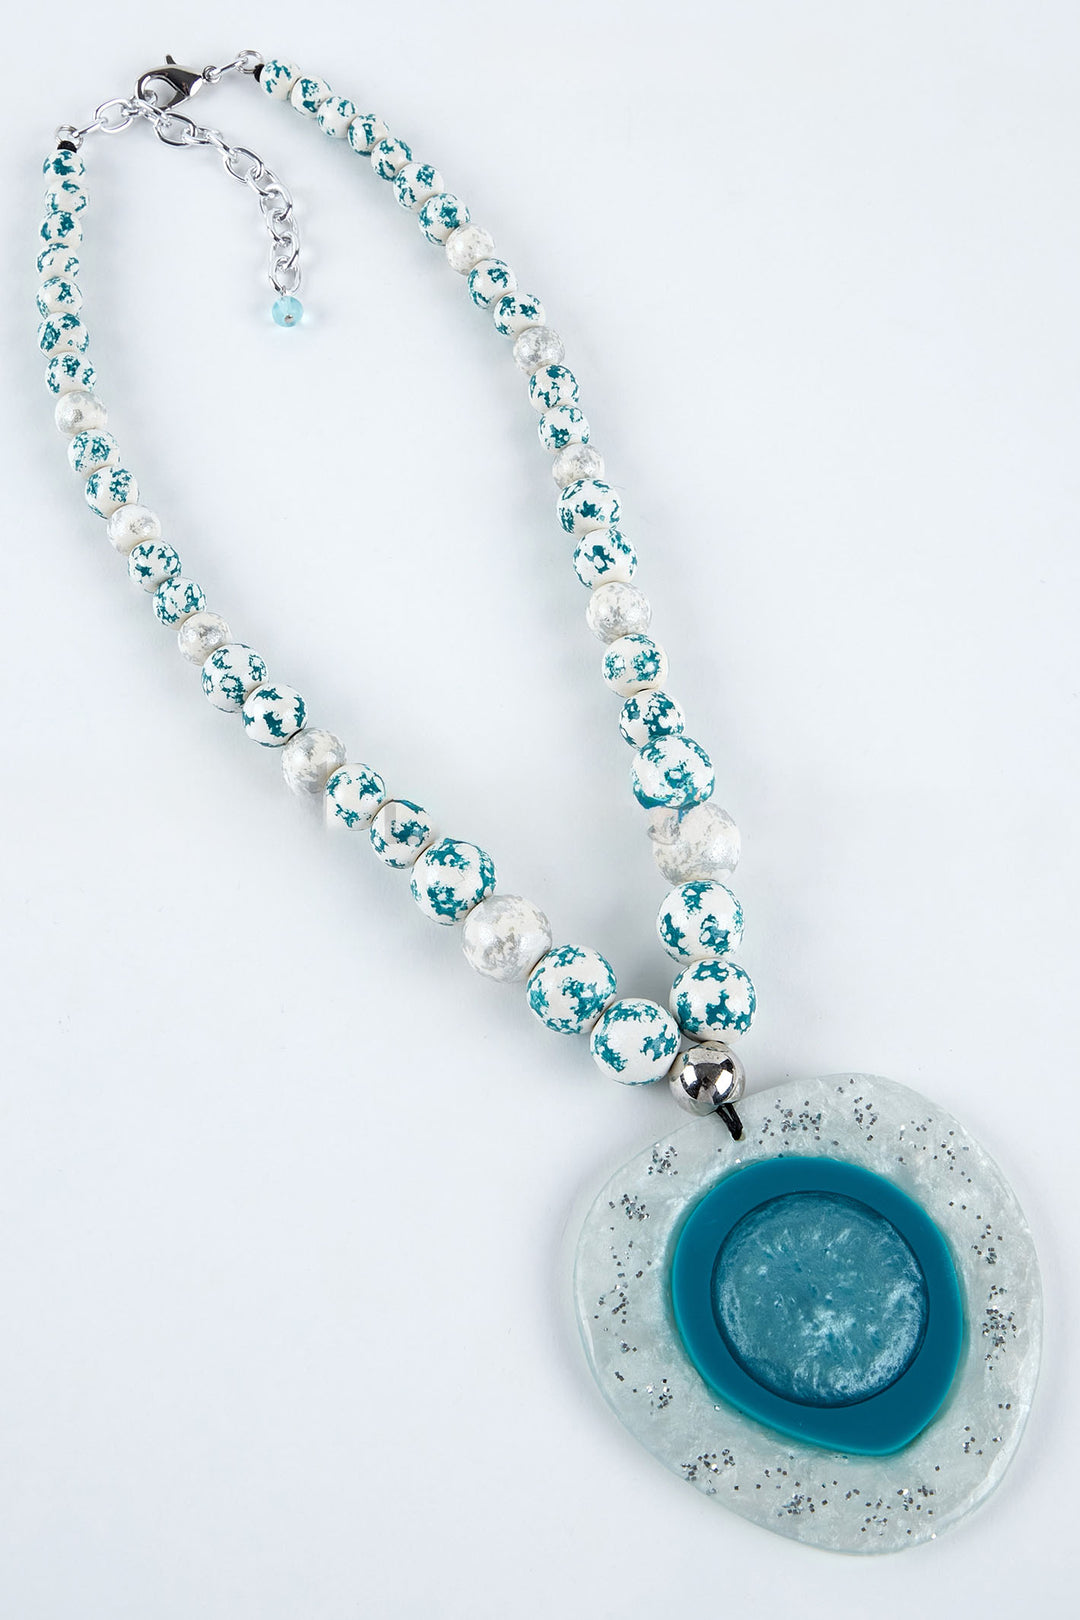 Dante NL70749 Pearlescent Teal Bead Necklace - Experience Boutique